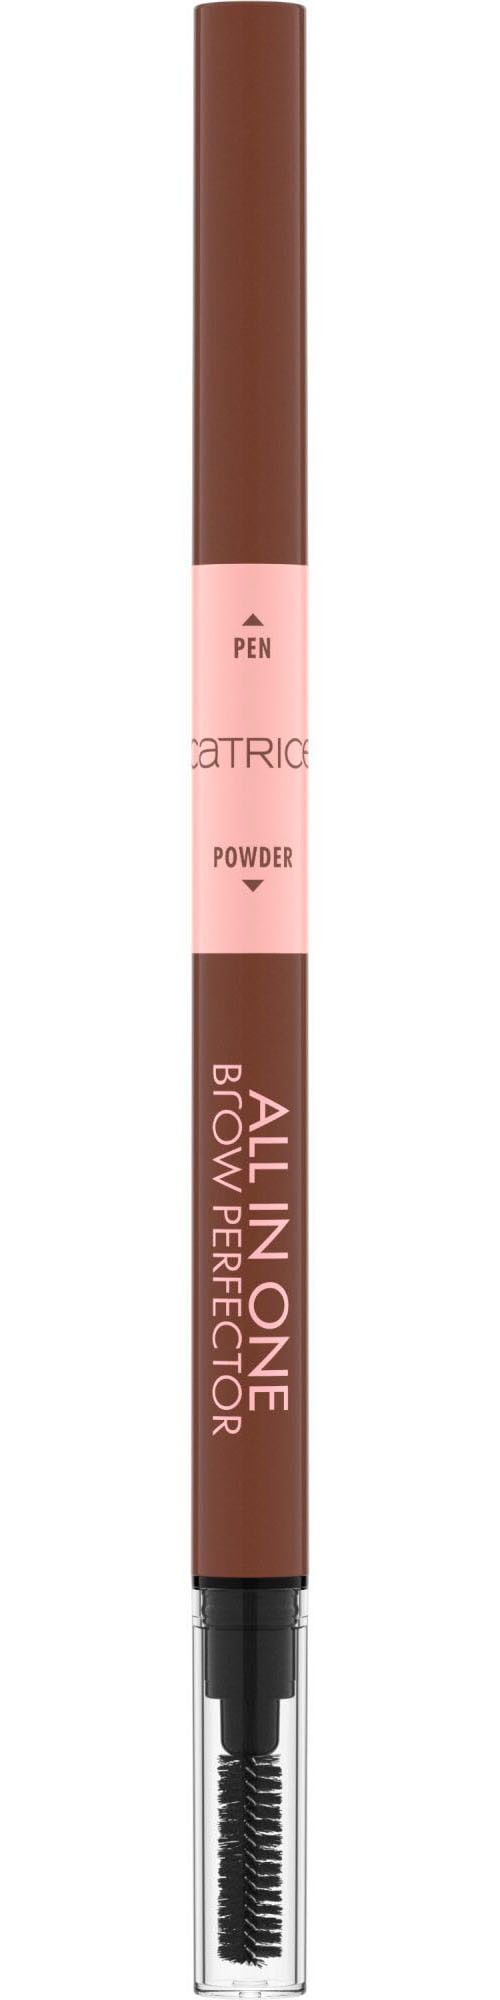 Catrice Augenbrauen-Stift »All in One Brow Per...